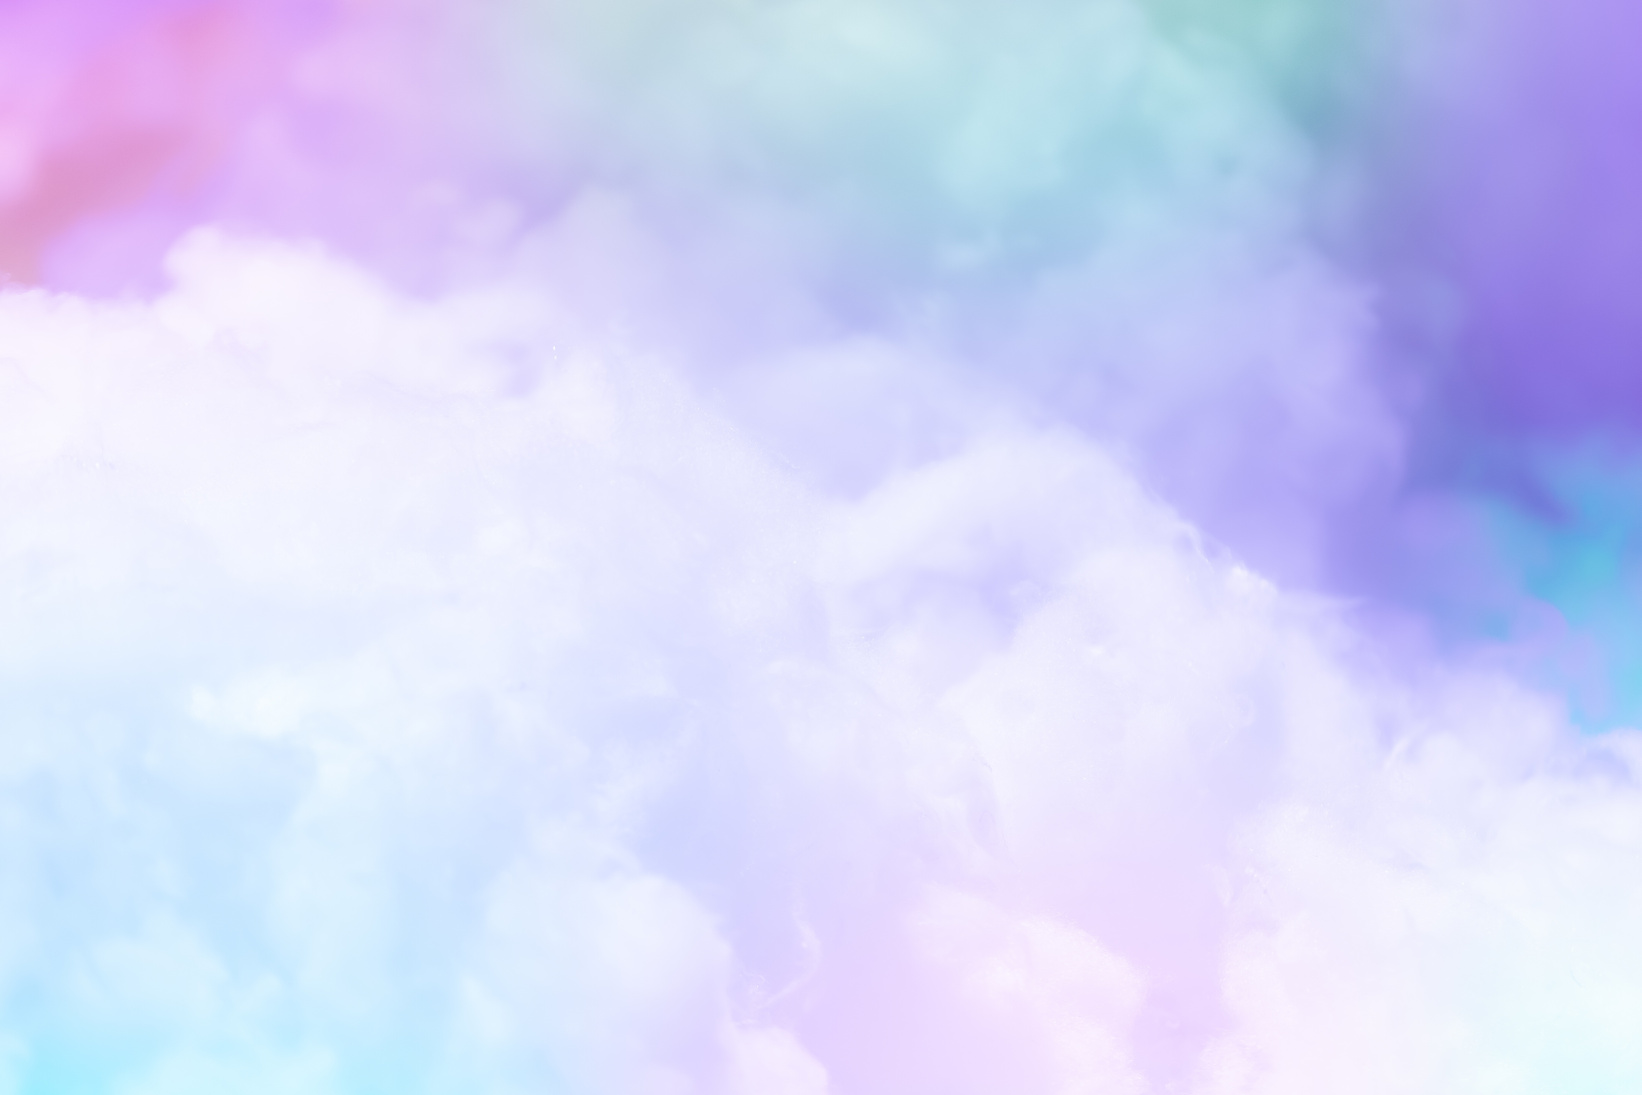 Cloud series : Colorful cotton candy. Soft fog and clouds with a pastel colored rainbow gradient for background.